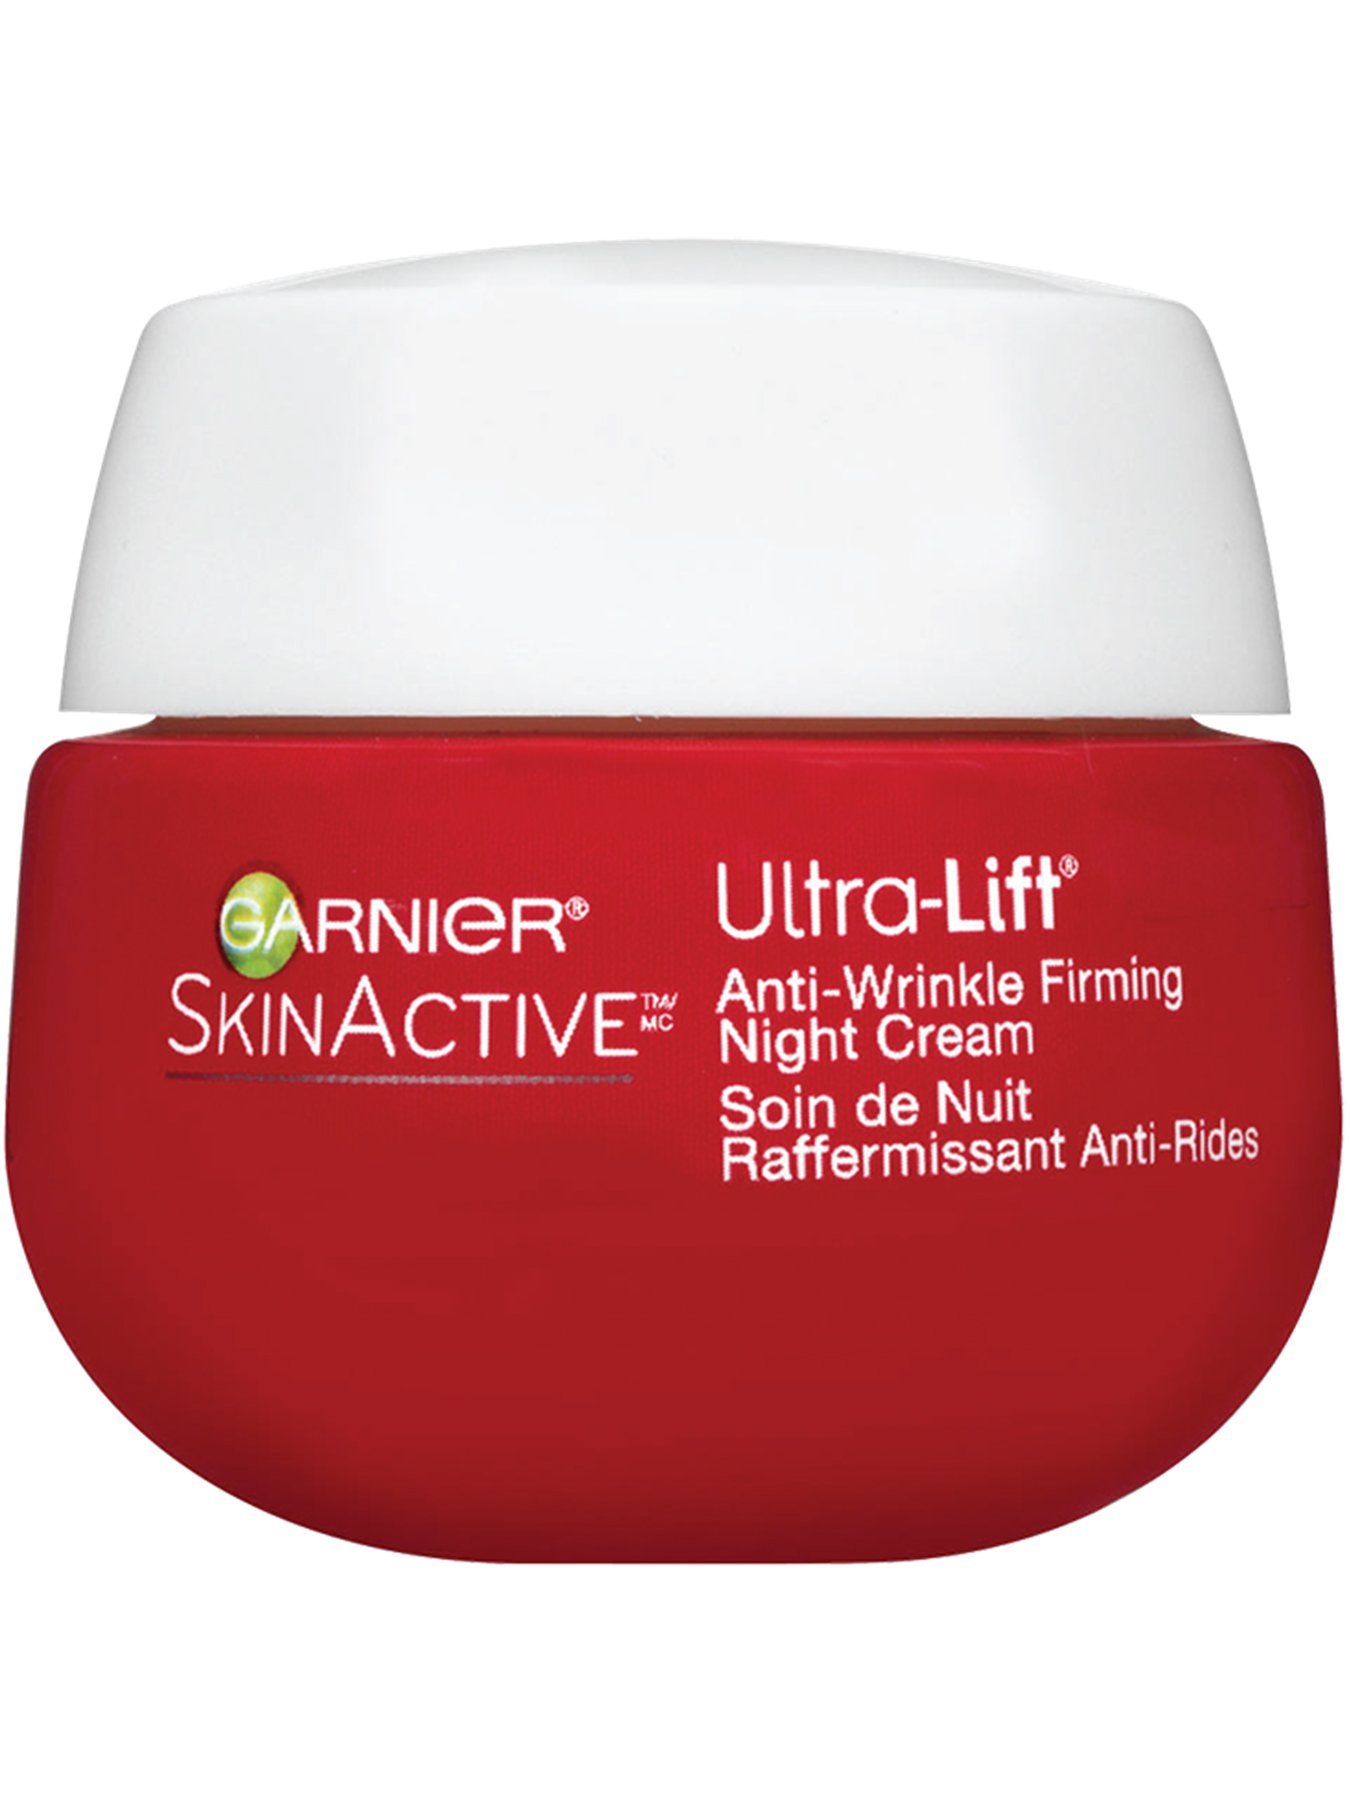 Front view of Ultra-Lift Anti-Wrinkle Night Cream.